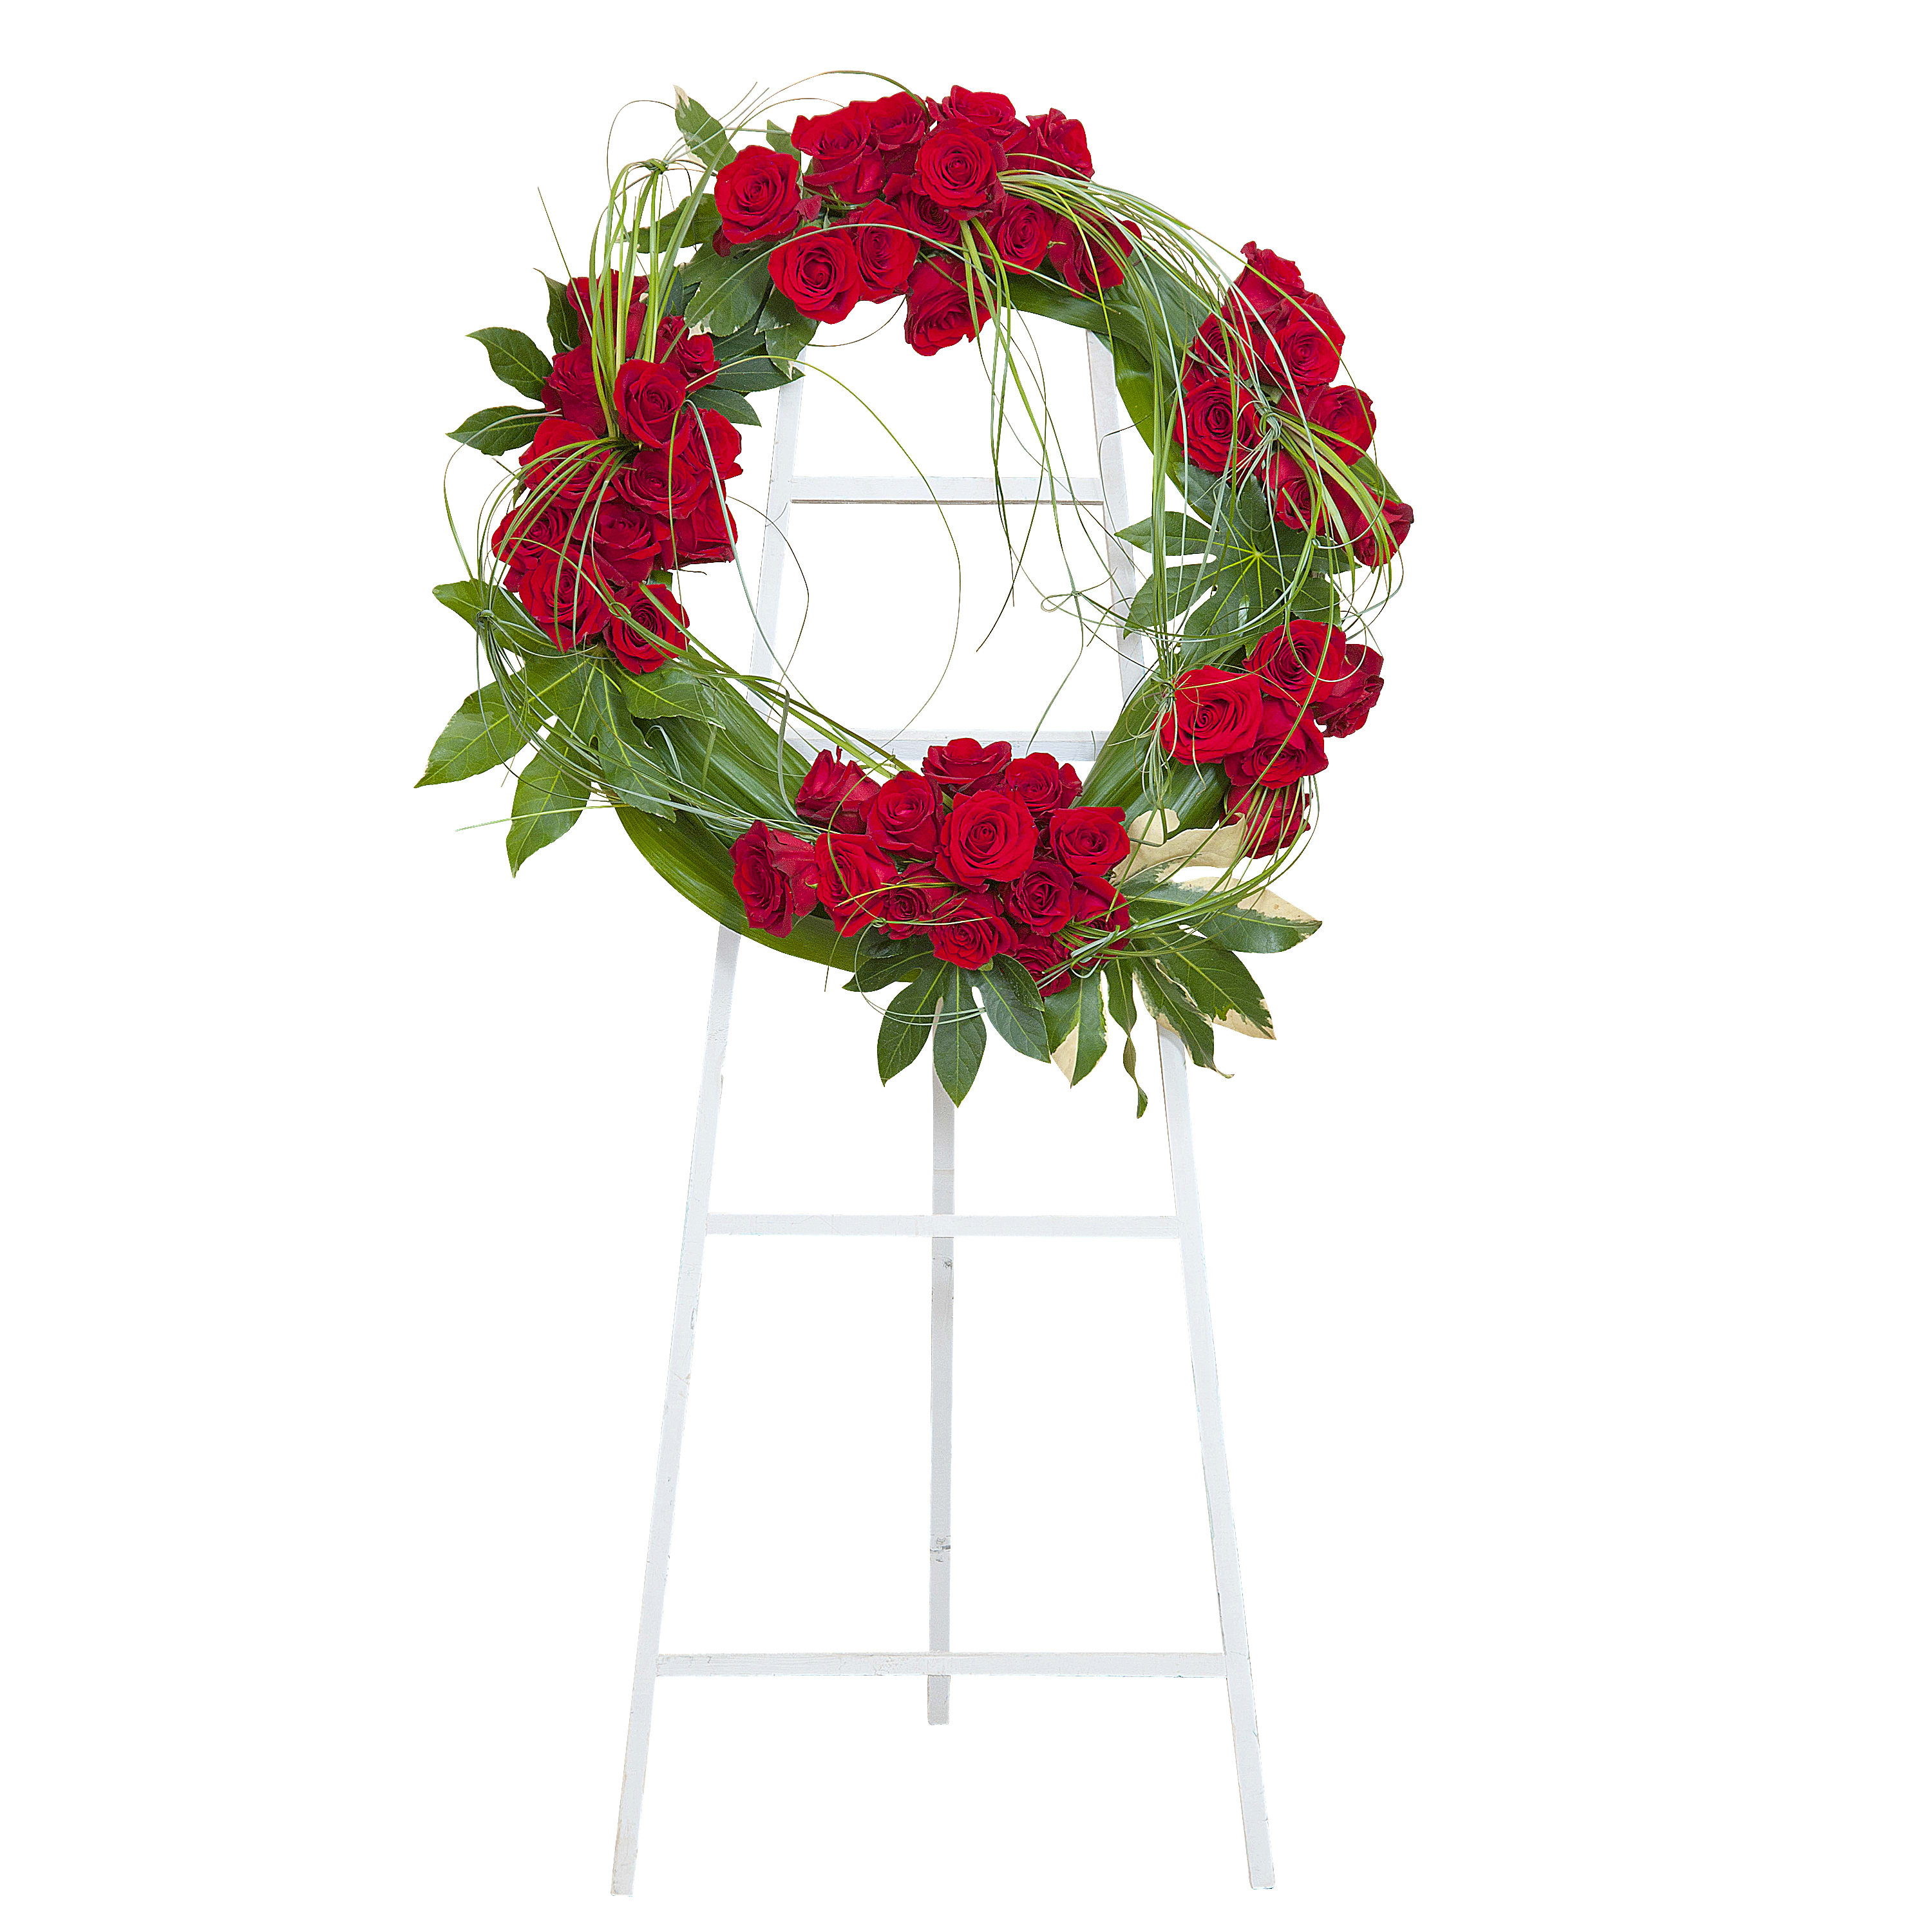 Royal Wreath  - A wreath with red Roses and foliage fit for the royal tribute.	Approximately 24&quot; wide by 24&quot; high